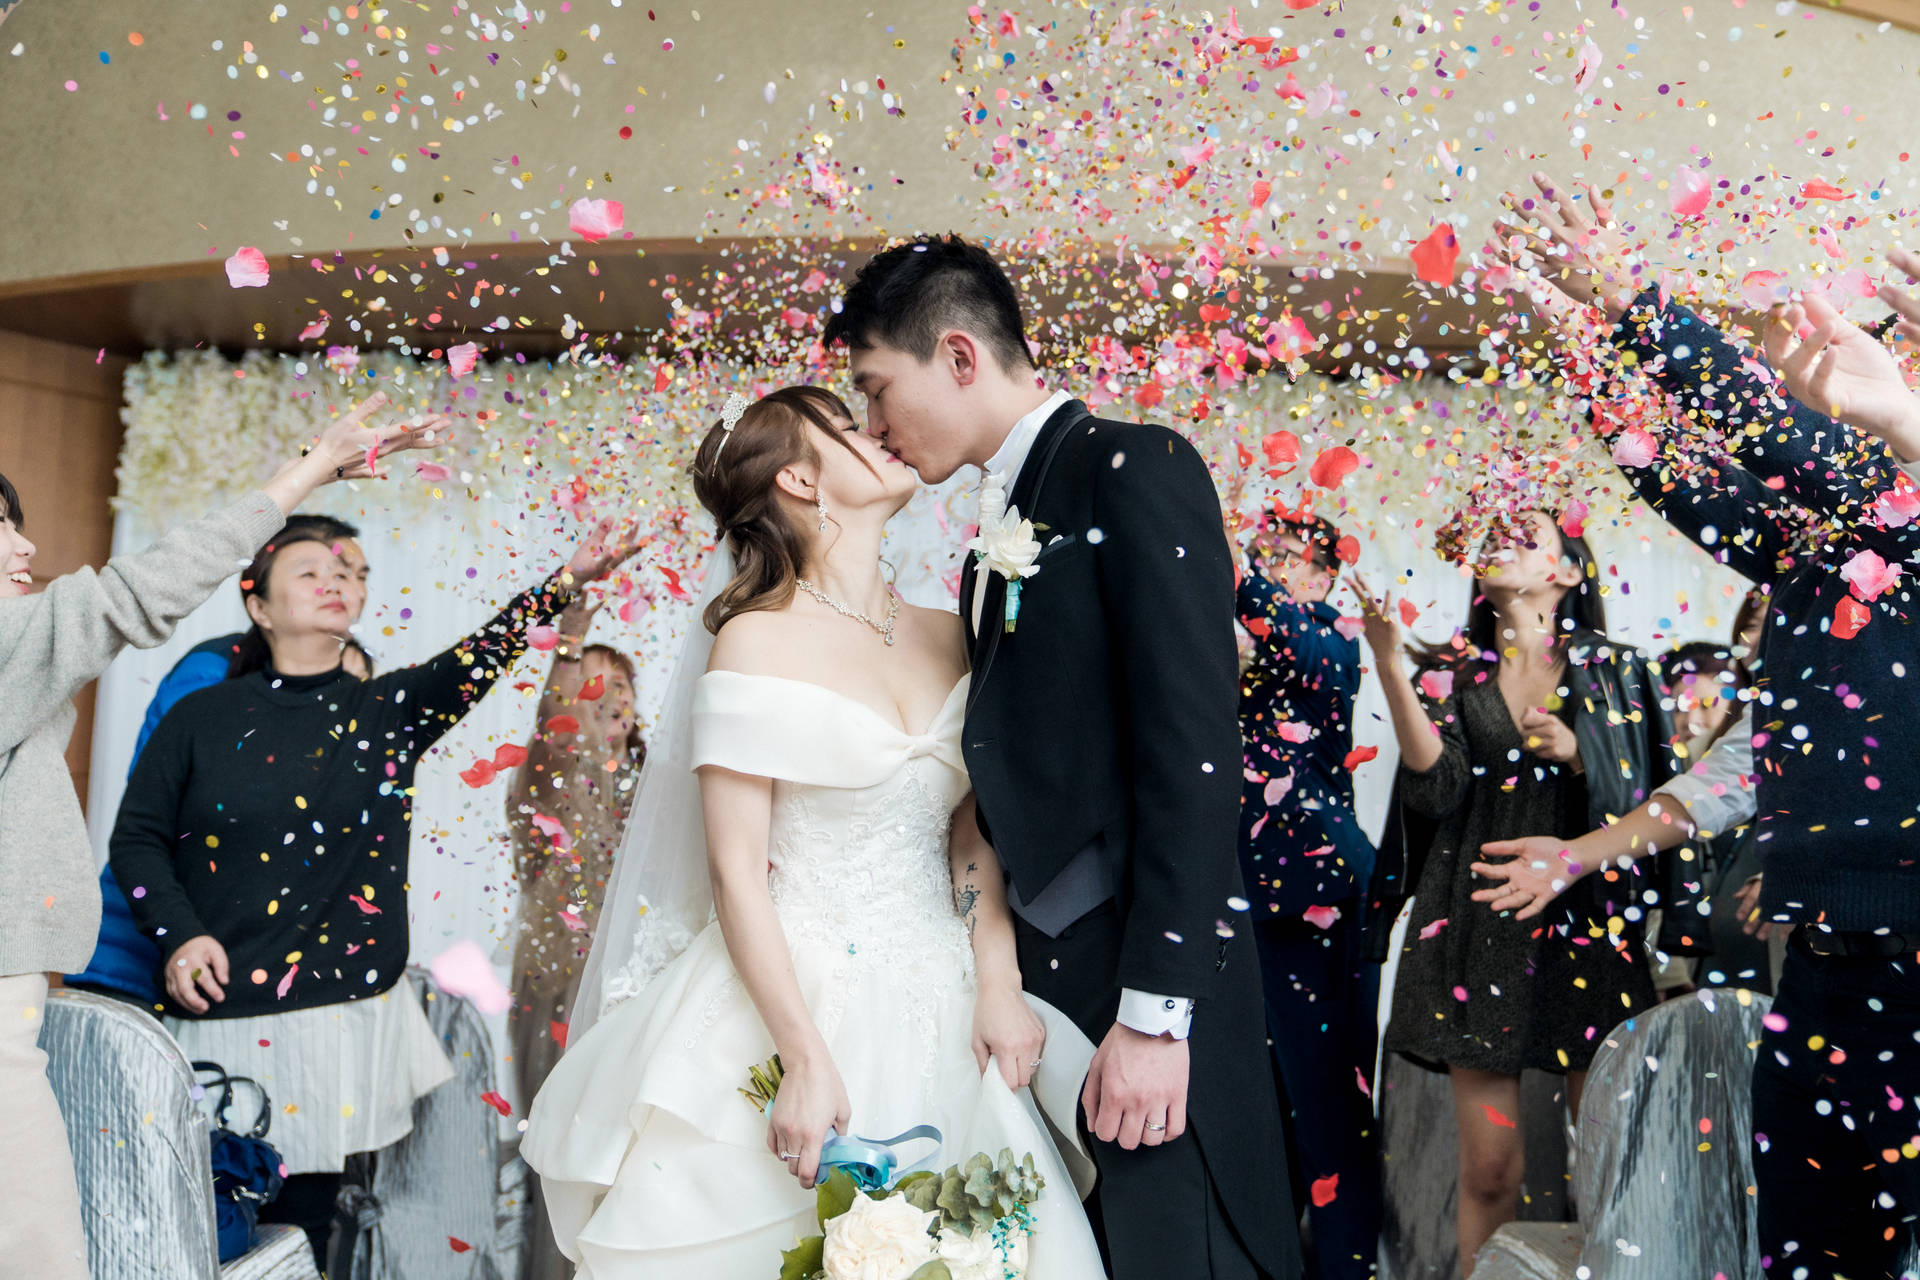 Groom And Bride With Confetti Background